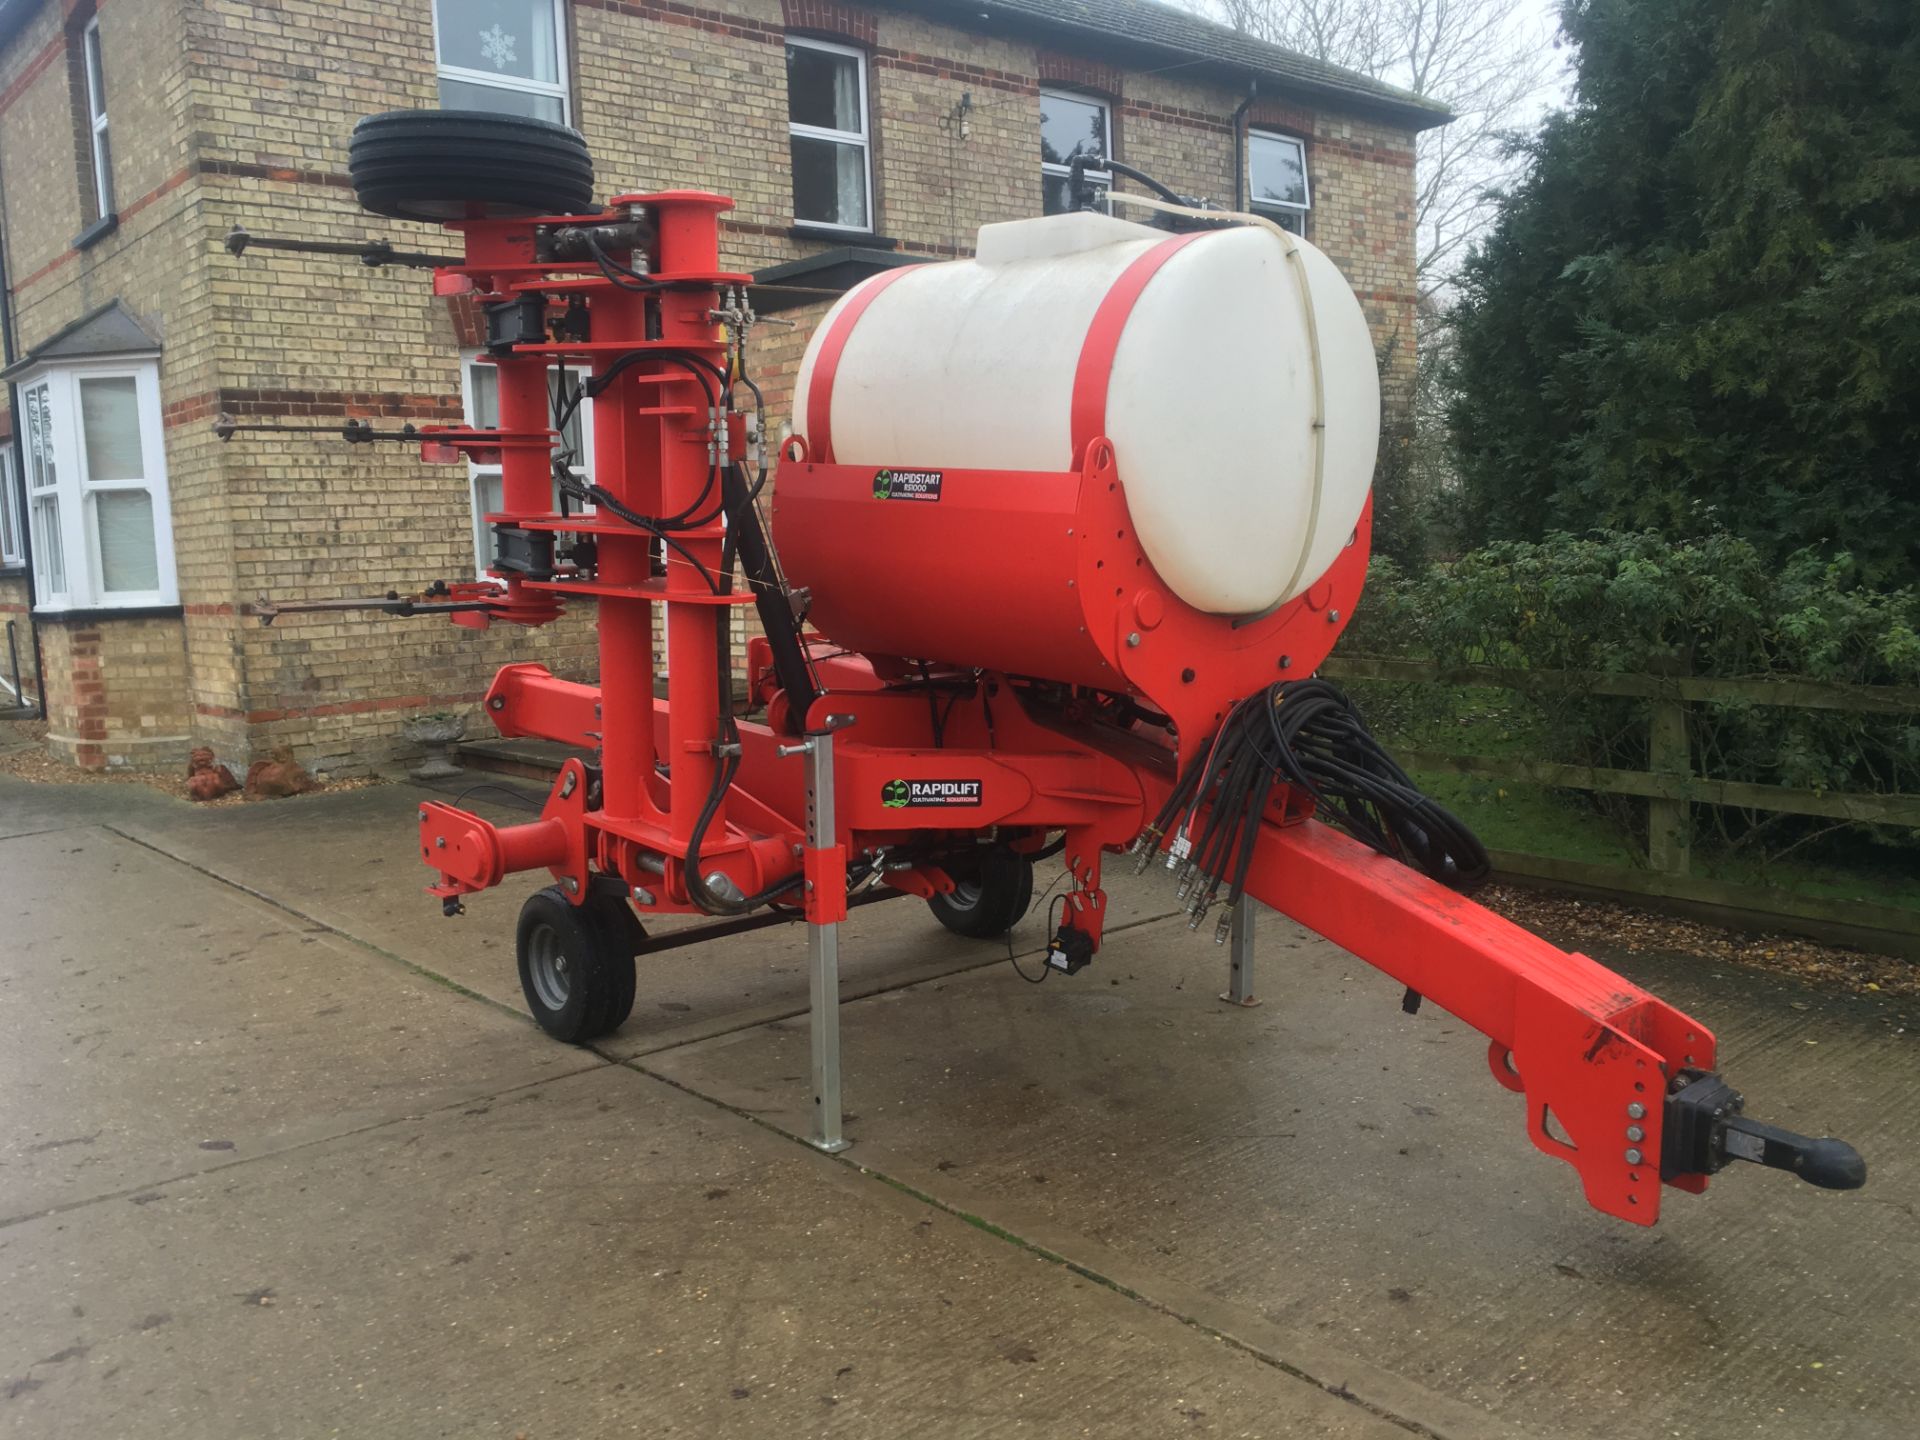 Vaderstad Rapid A600S Drill (07), Serial No. 14277, Location - Sandy, Bedfordshire - Image 7 of 11